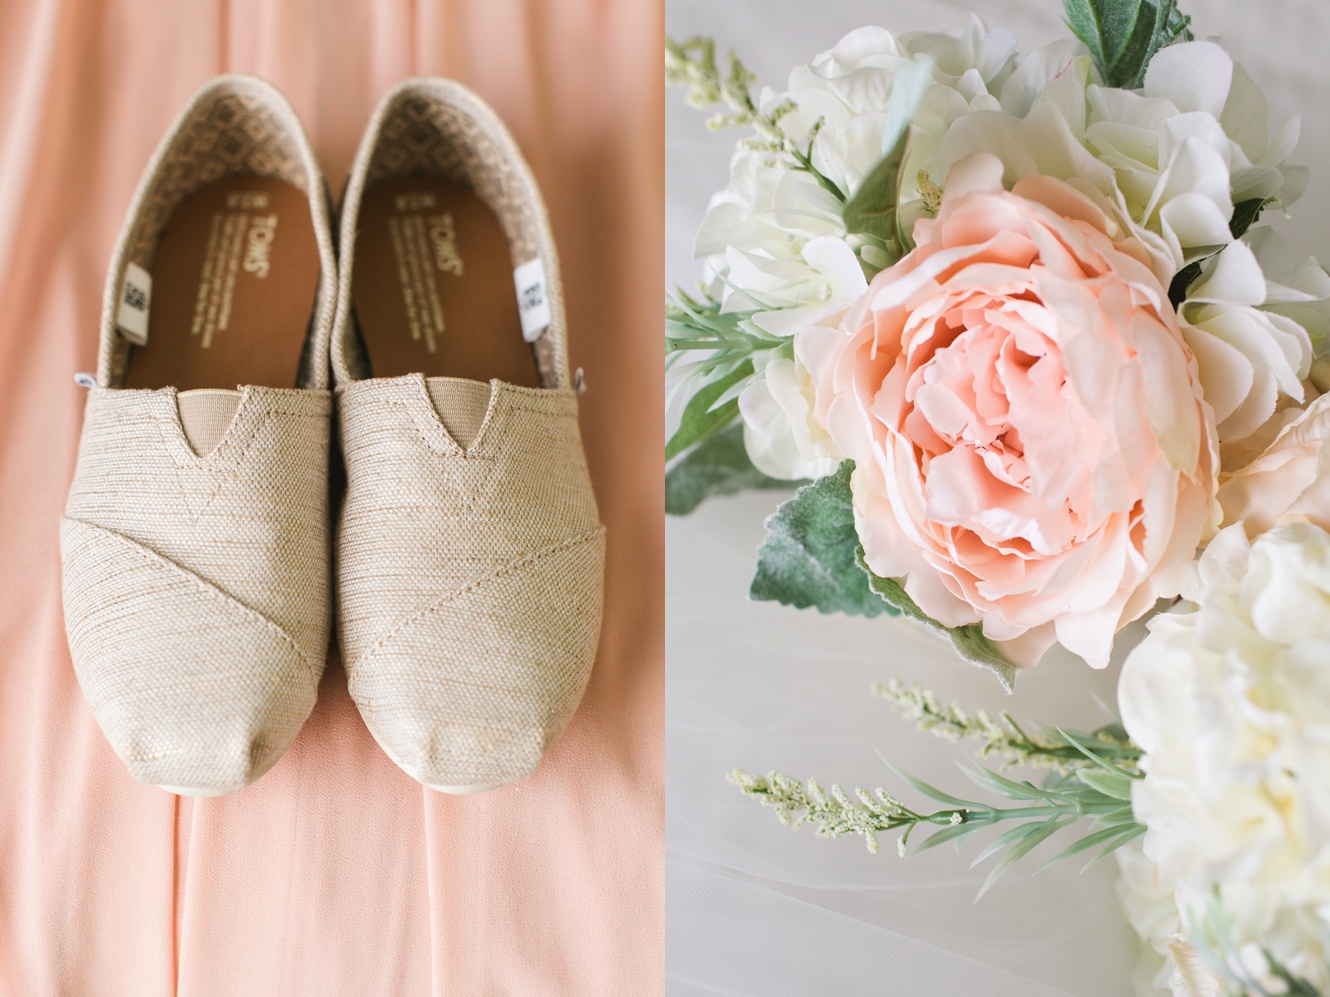 Toms wedding shoes photo